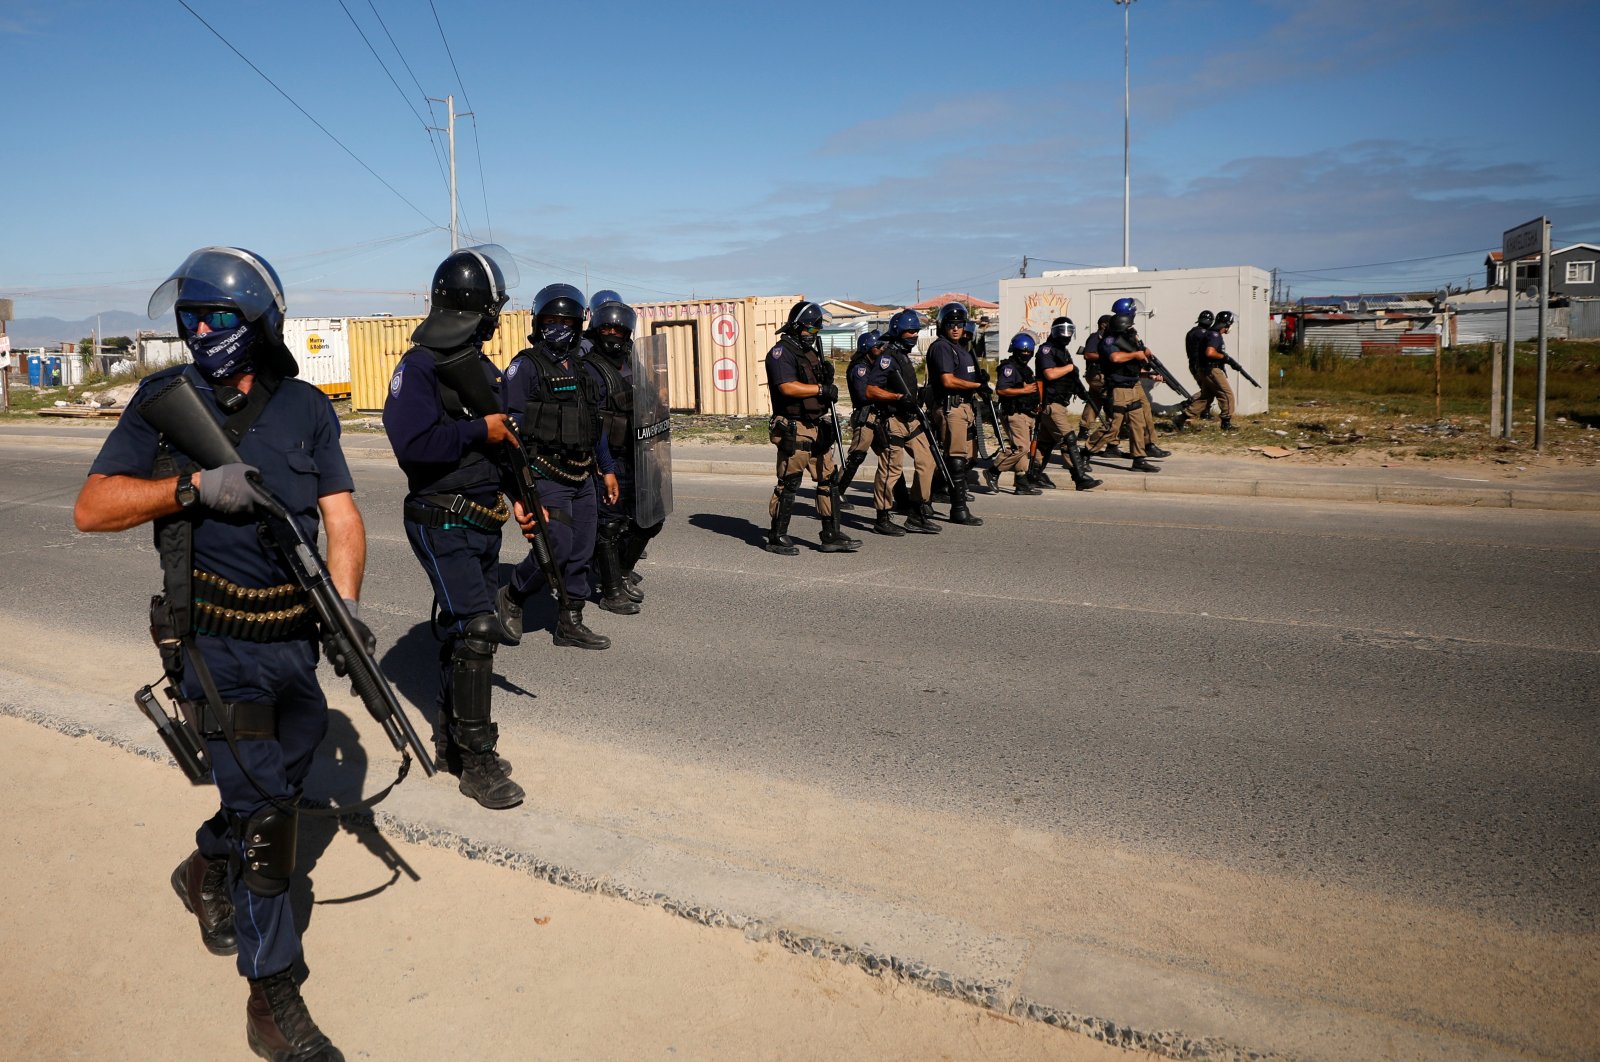 Police officers patrol the streets during a nationwide lockdown aimed at limiting the spread of the coronavirus disease (COVID-19), Cape Town, April 21, 2020. (REUTERS Photo)